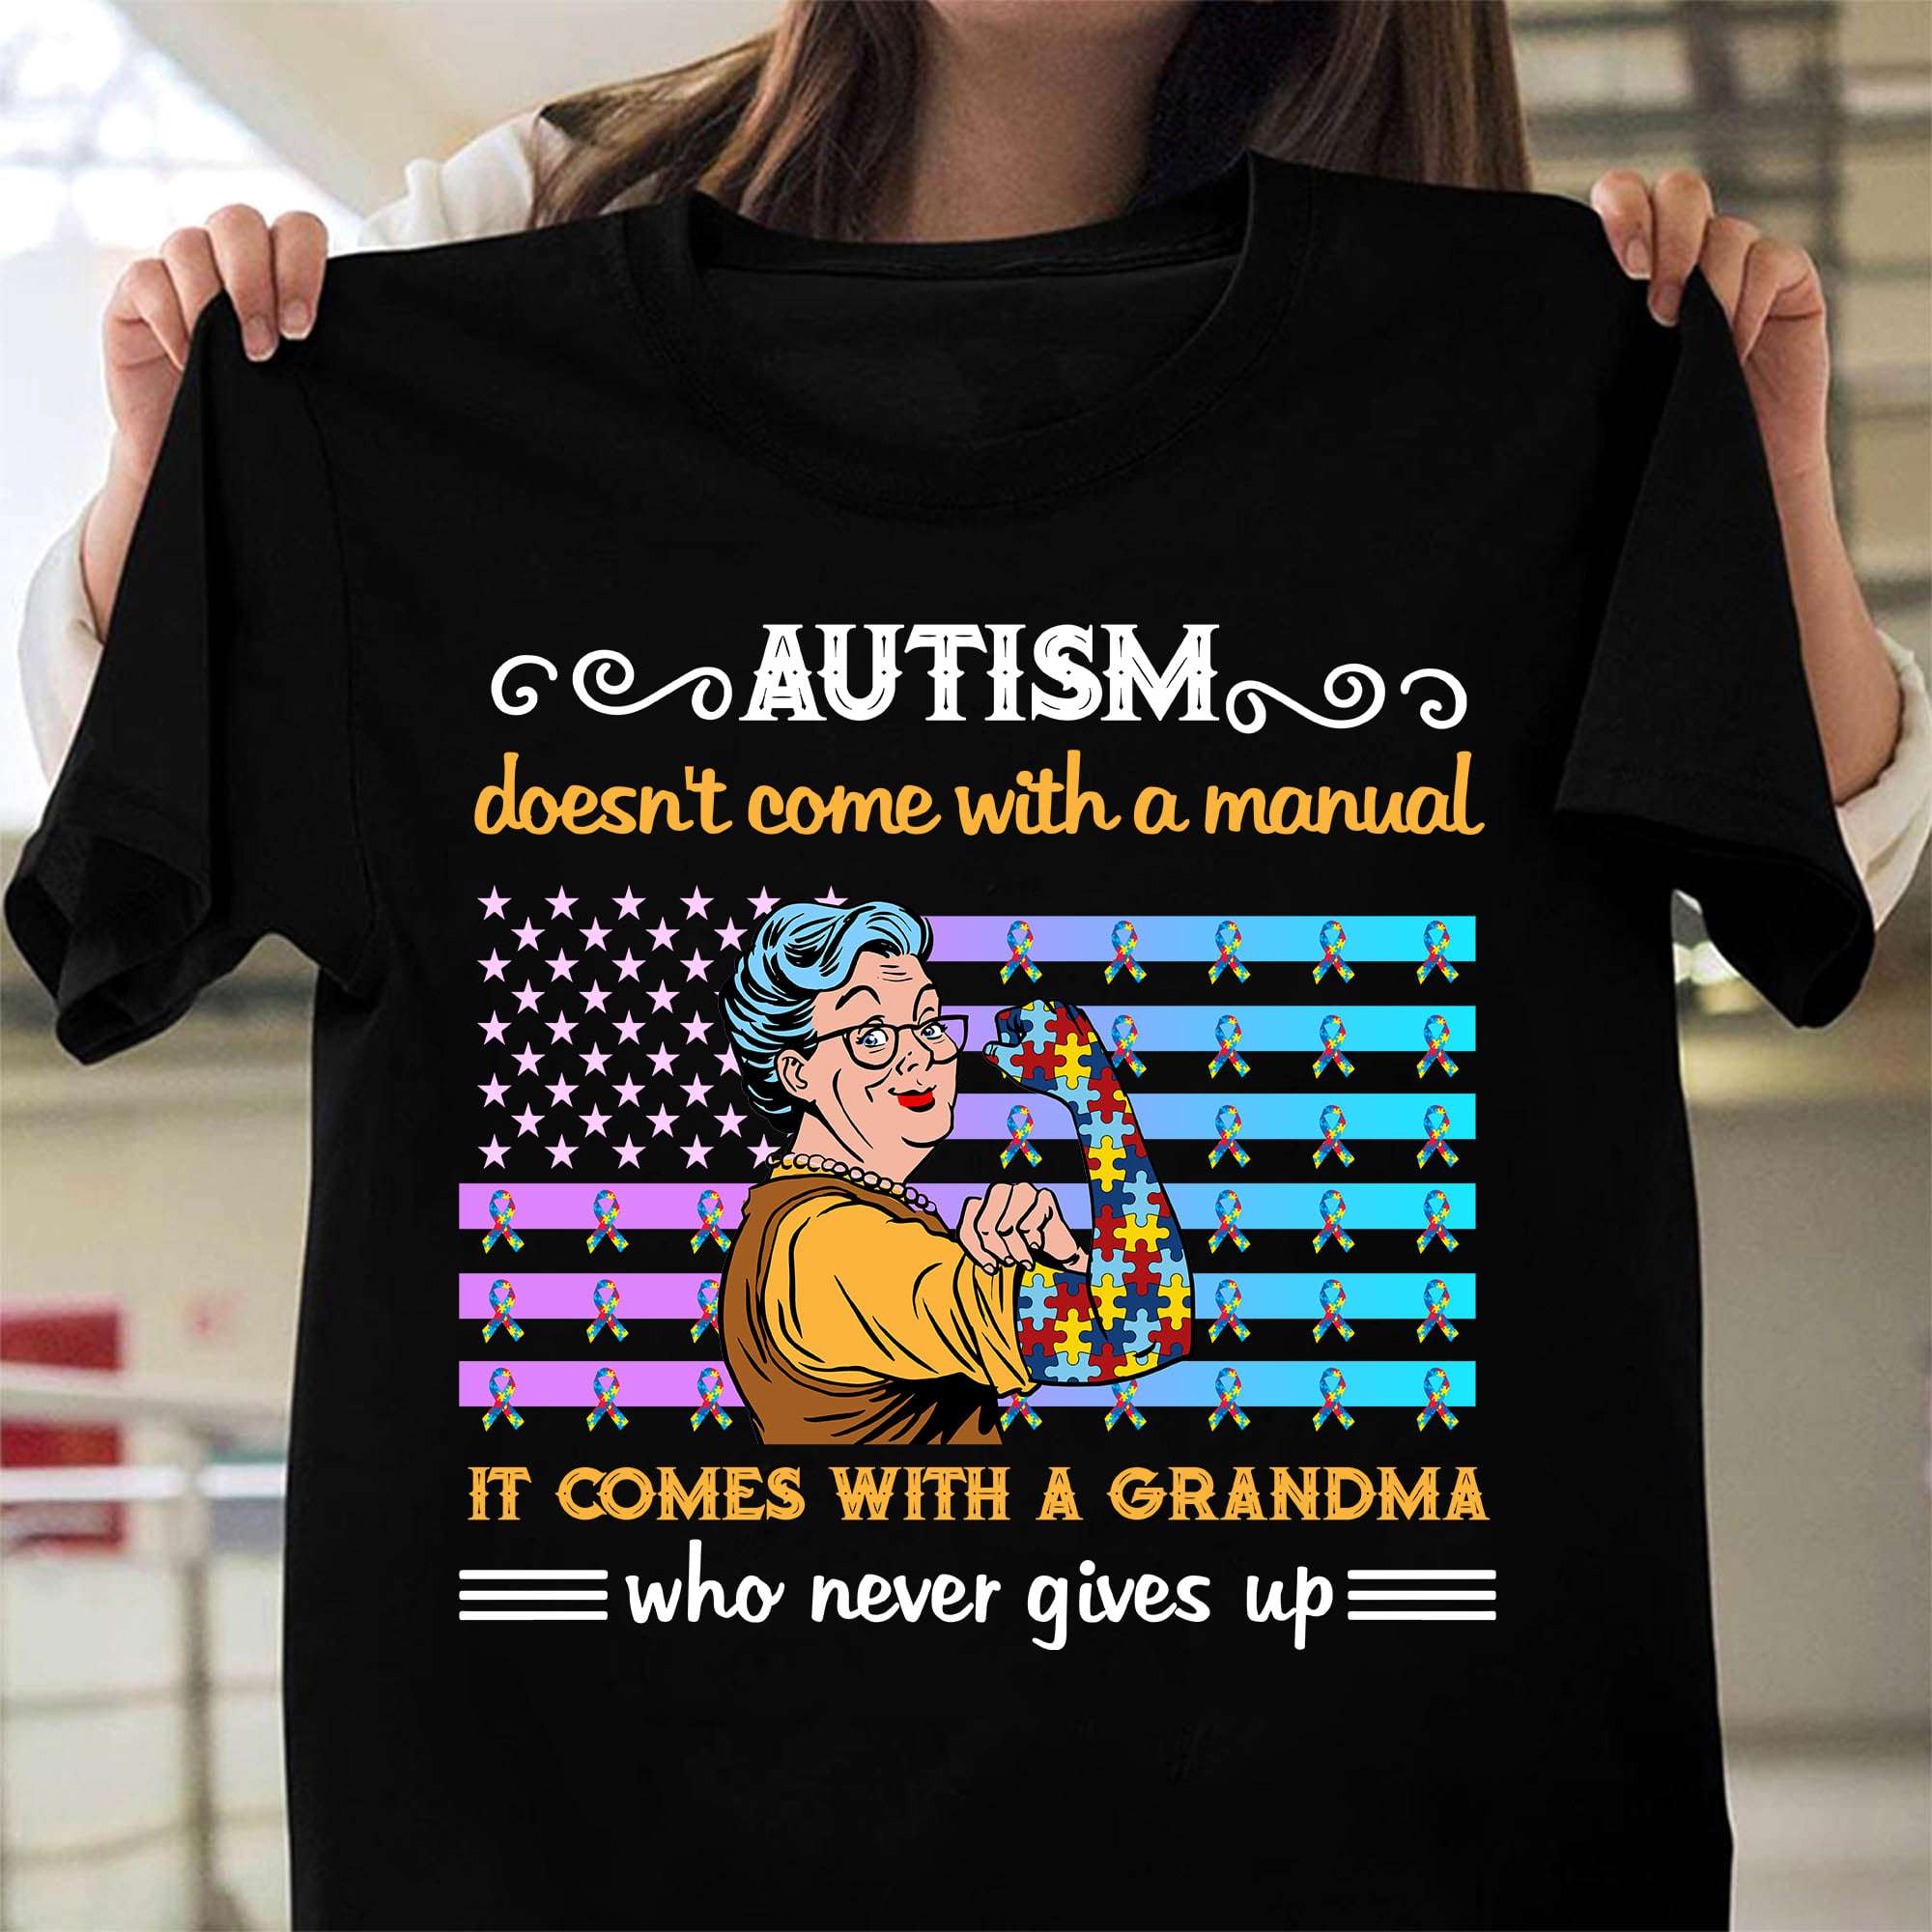 Autism doesn't come with a manual it comes with a grandma who never gives up - Autism grandma, autism awareness